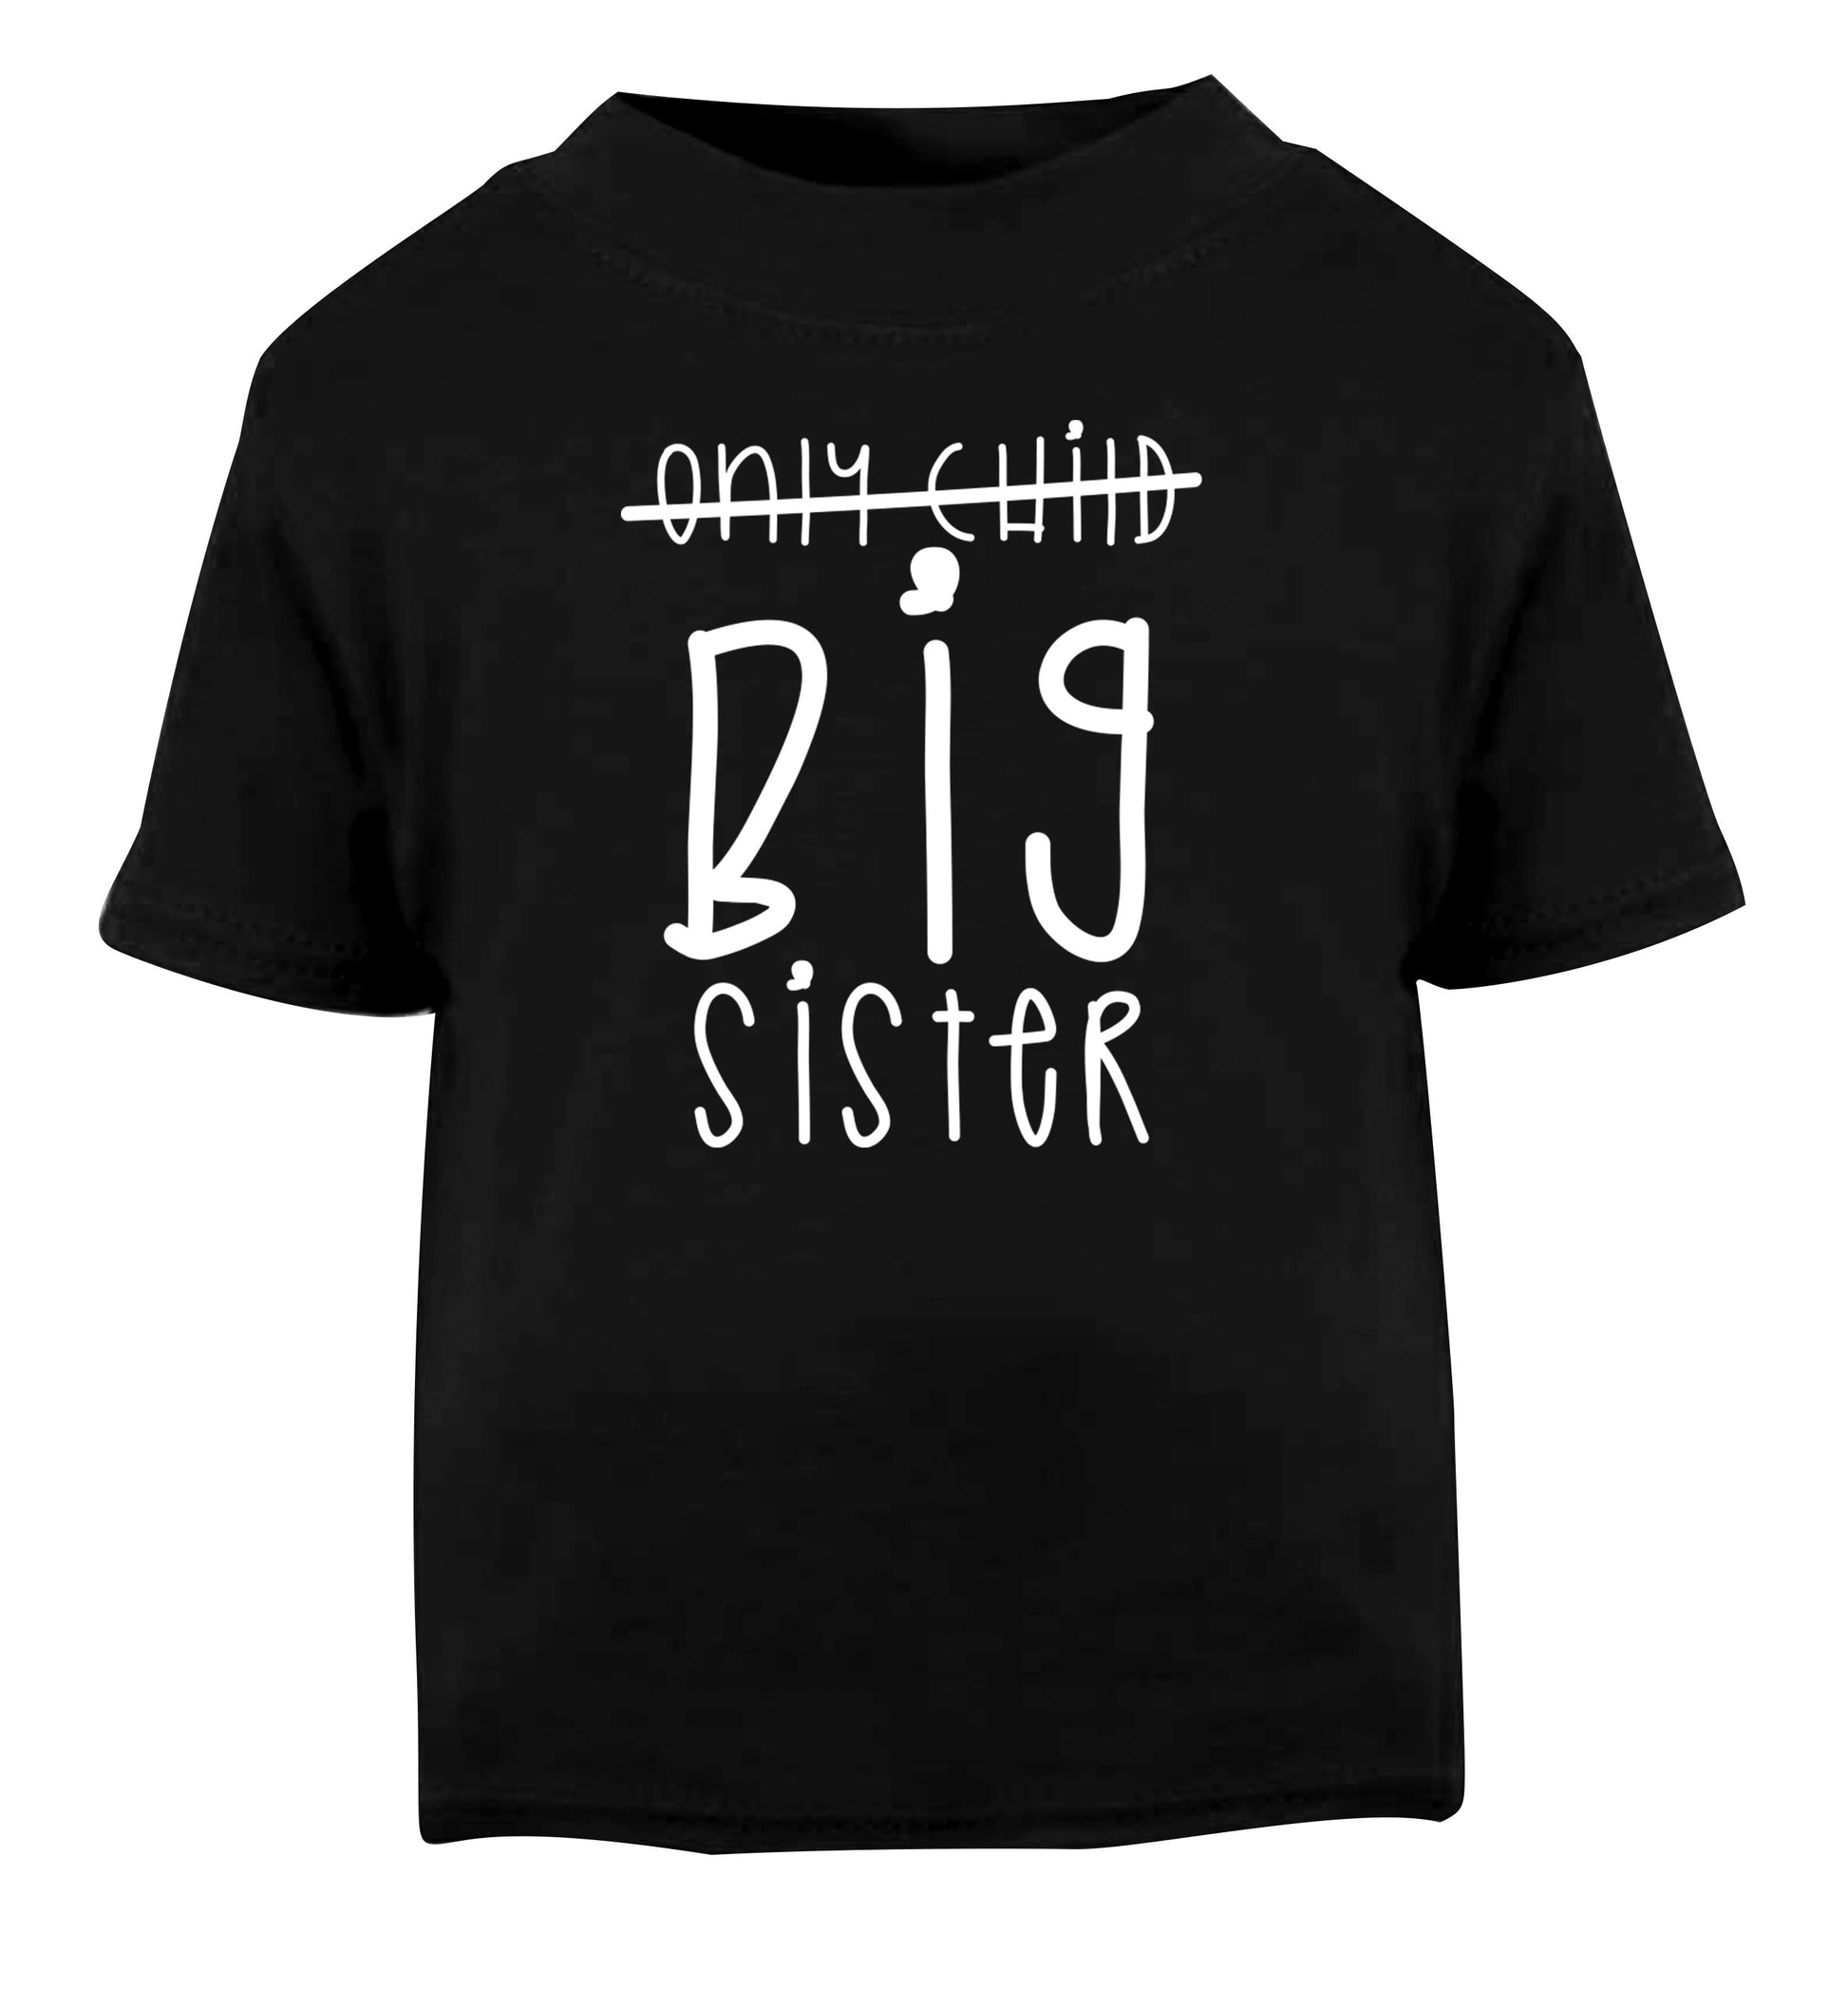 Only child big sister Black Baby Toddler Tshirt 2 years